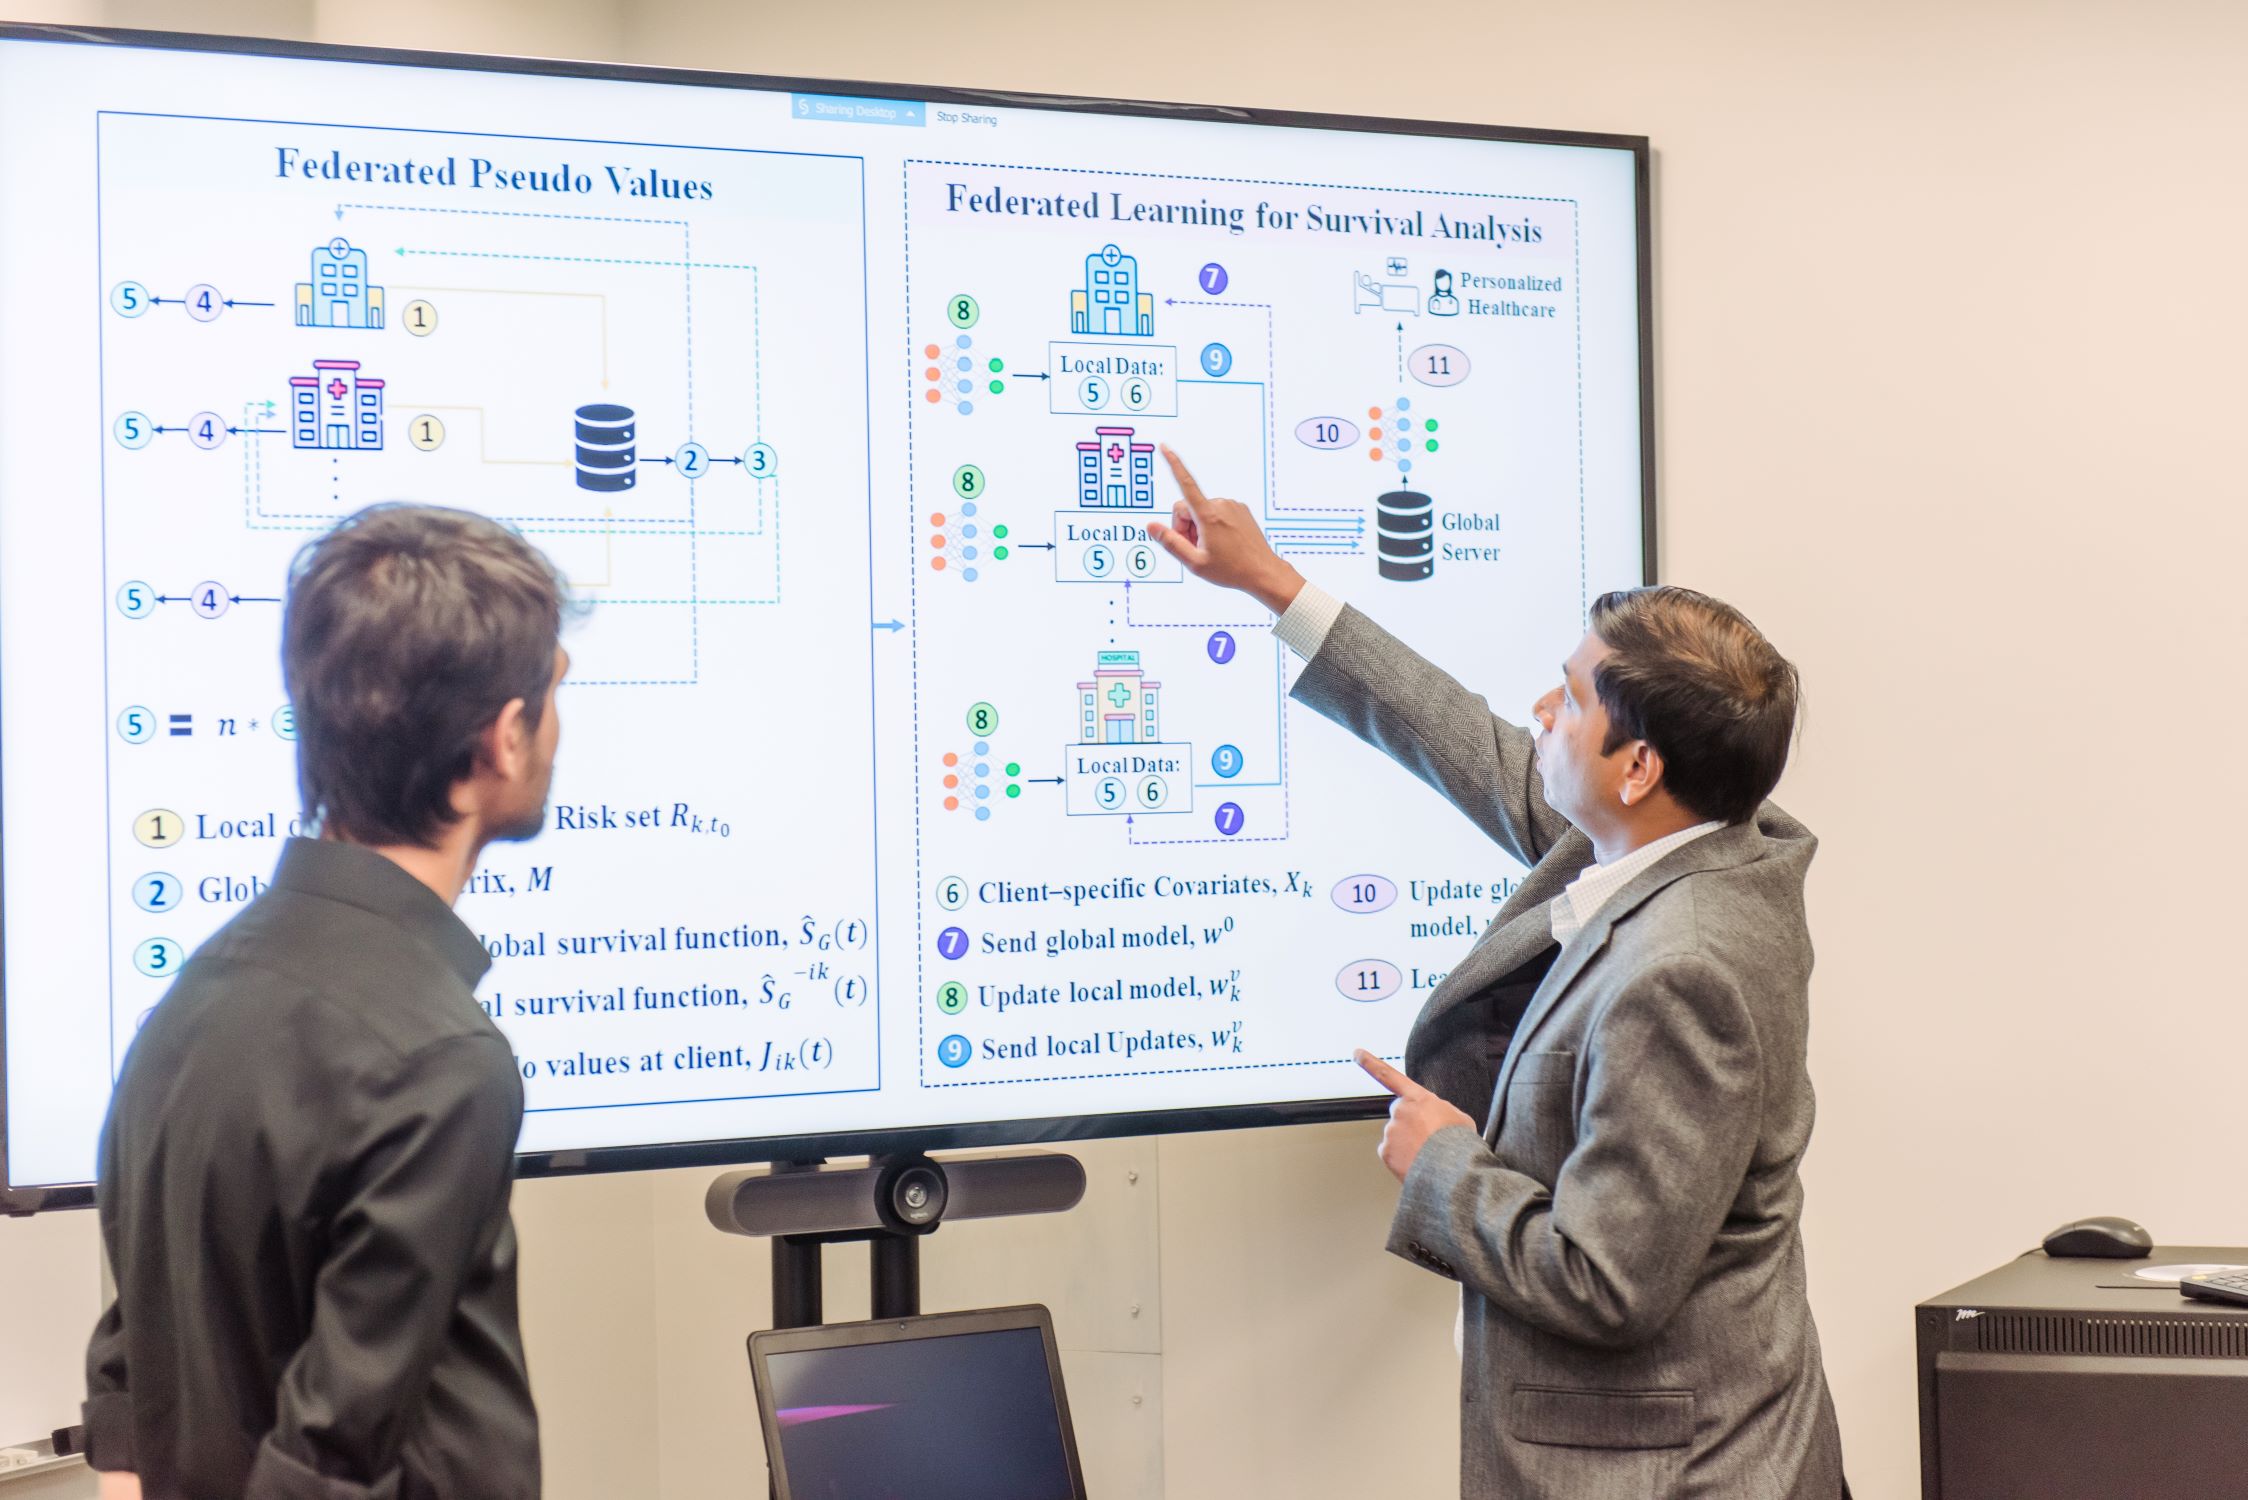 Two people look at screen showing scientific diagrams. One person is pointing.